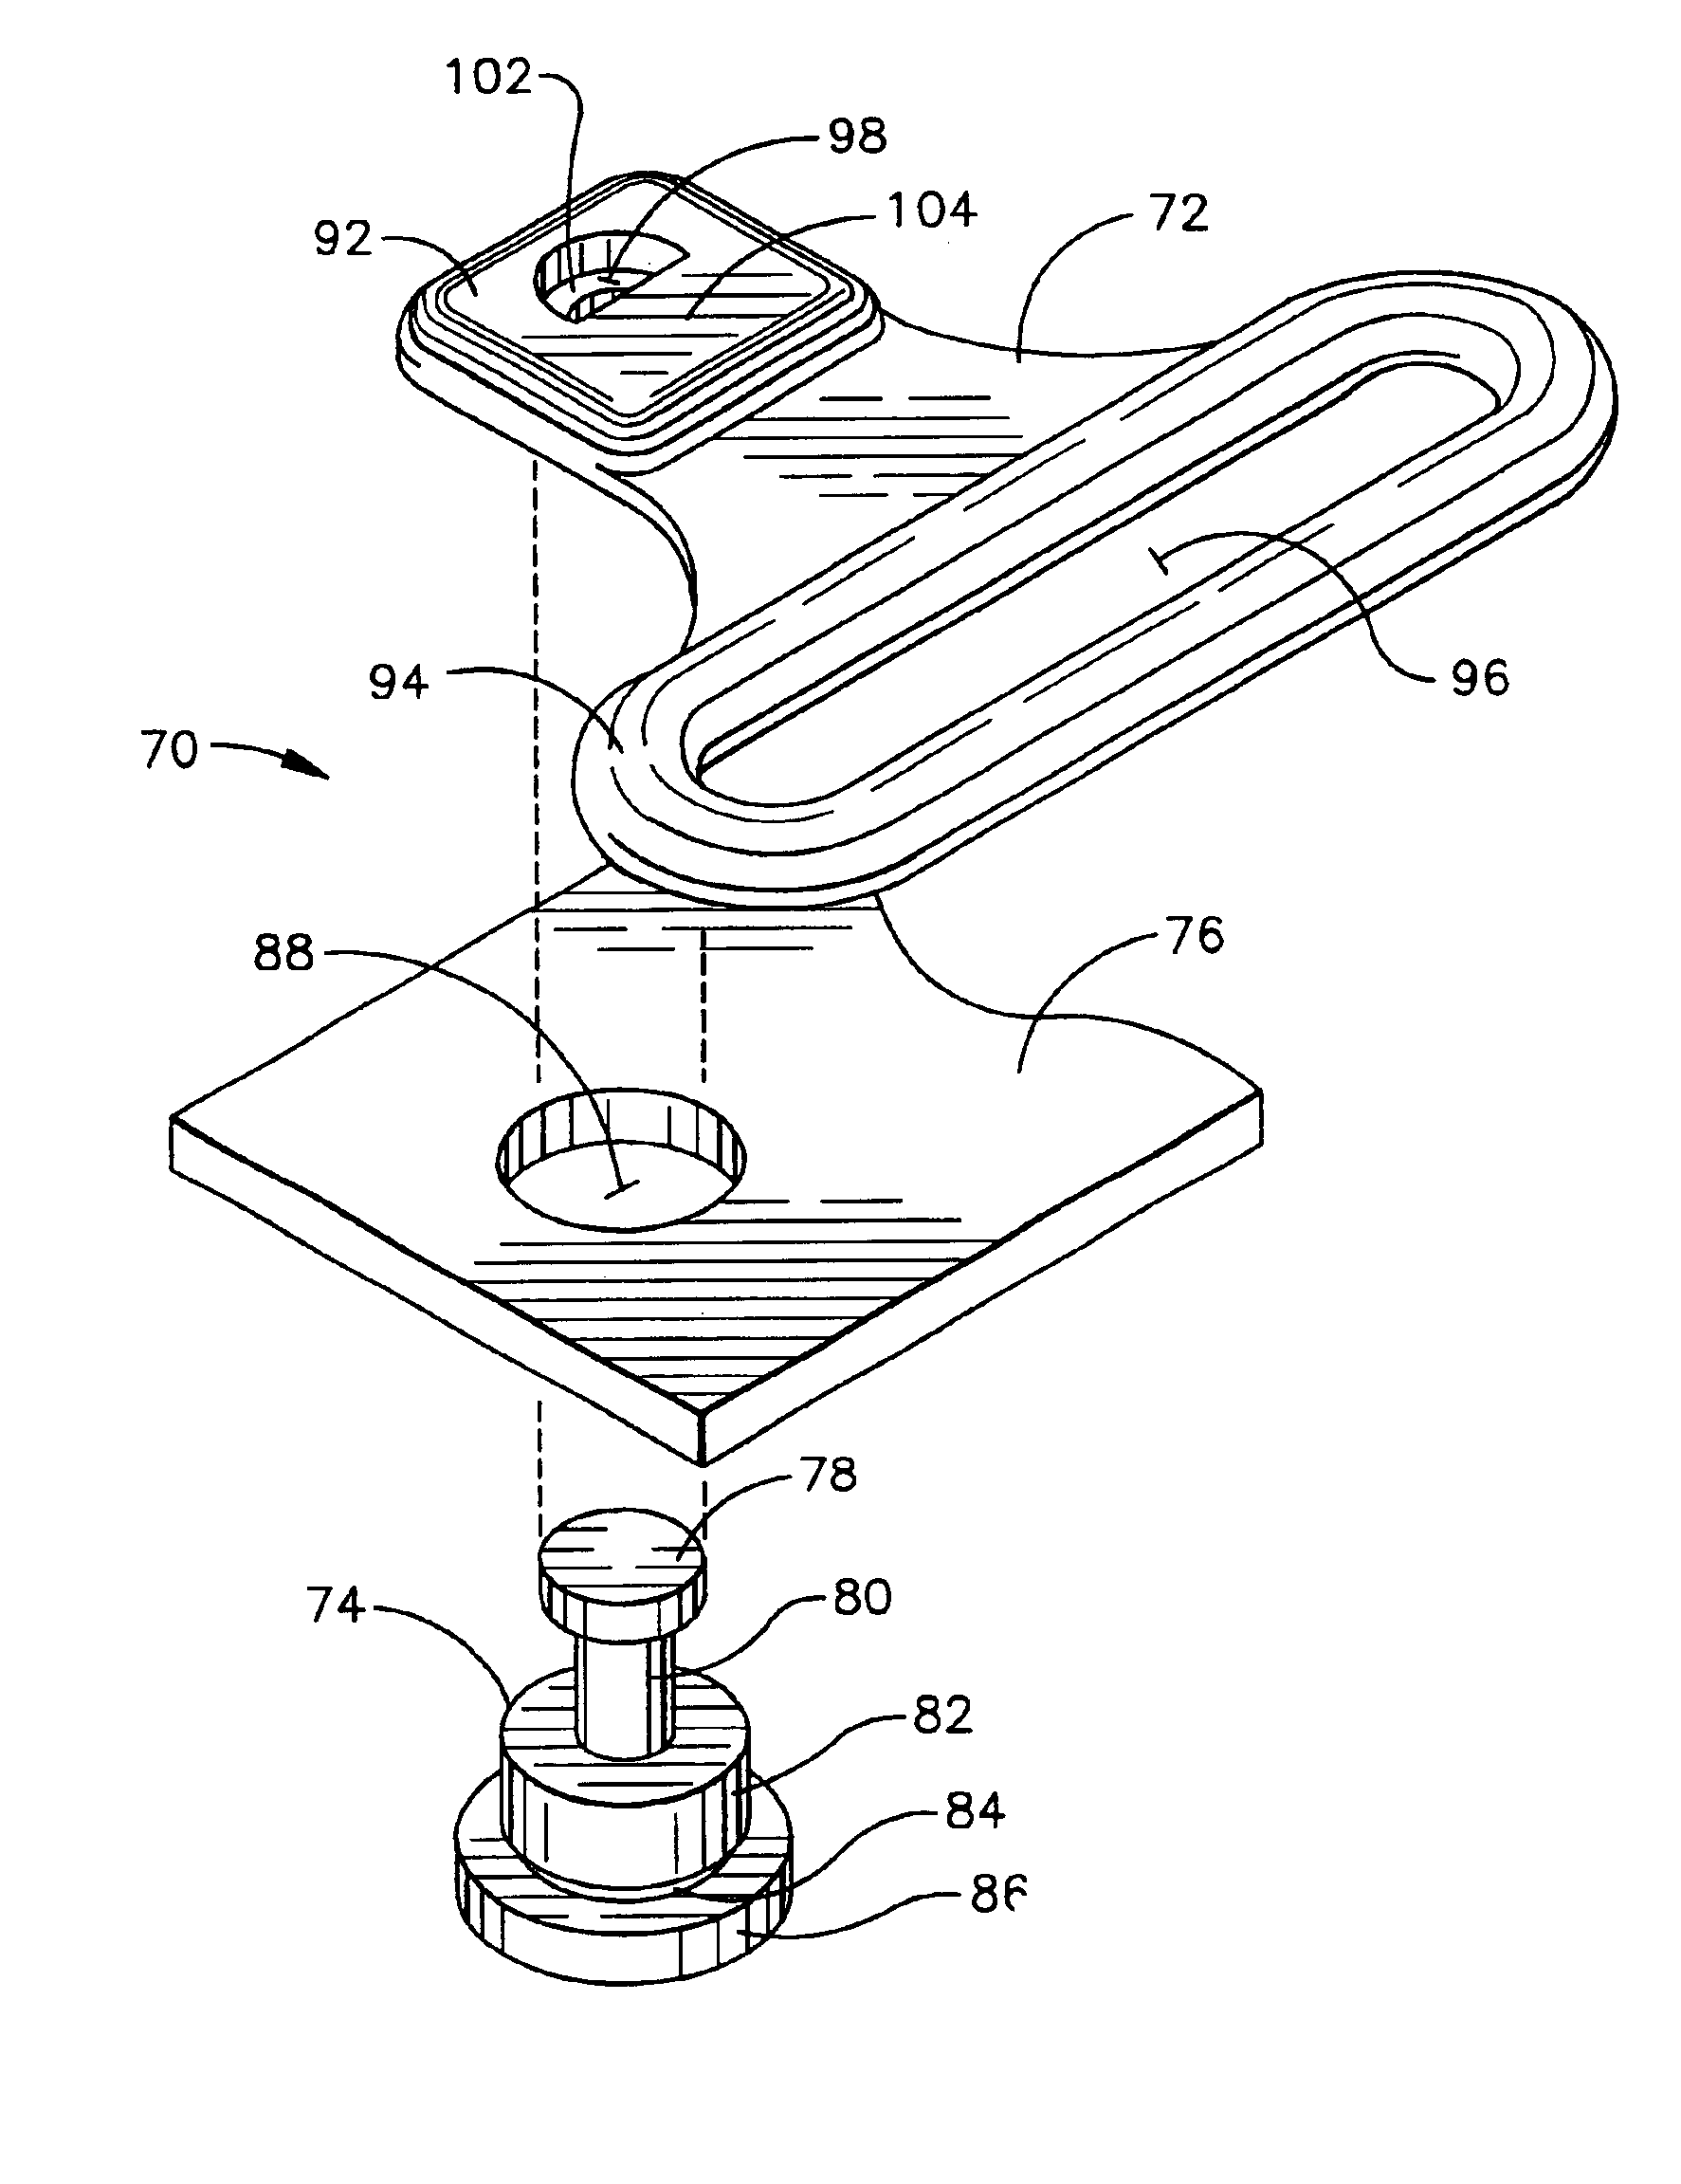 Strap connector assembly for an orthopedic brace